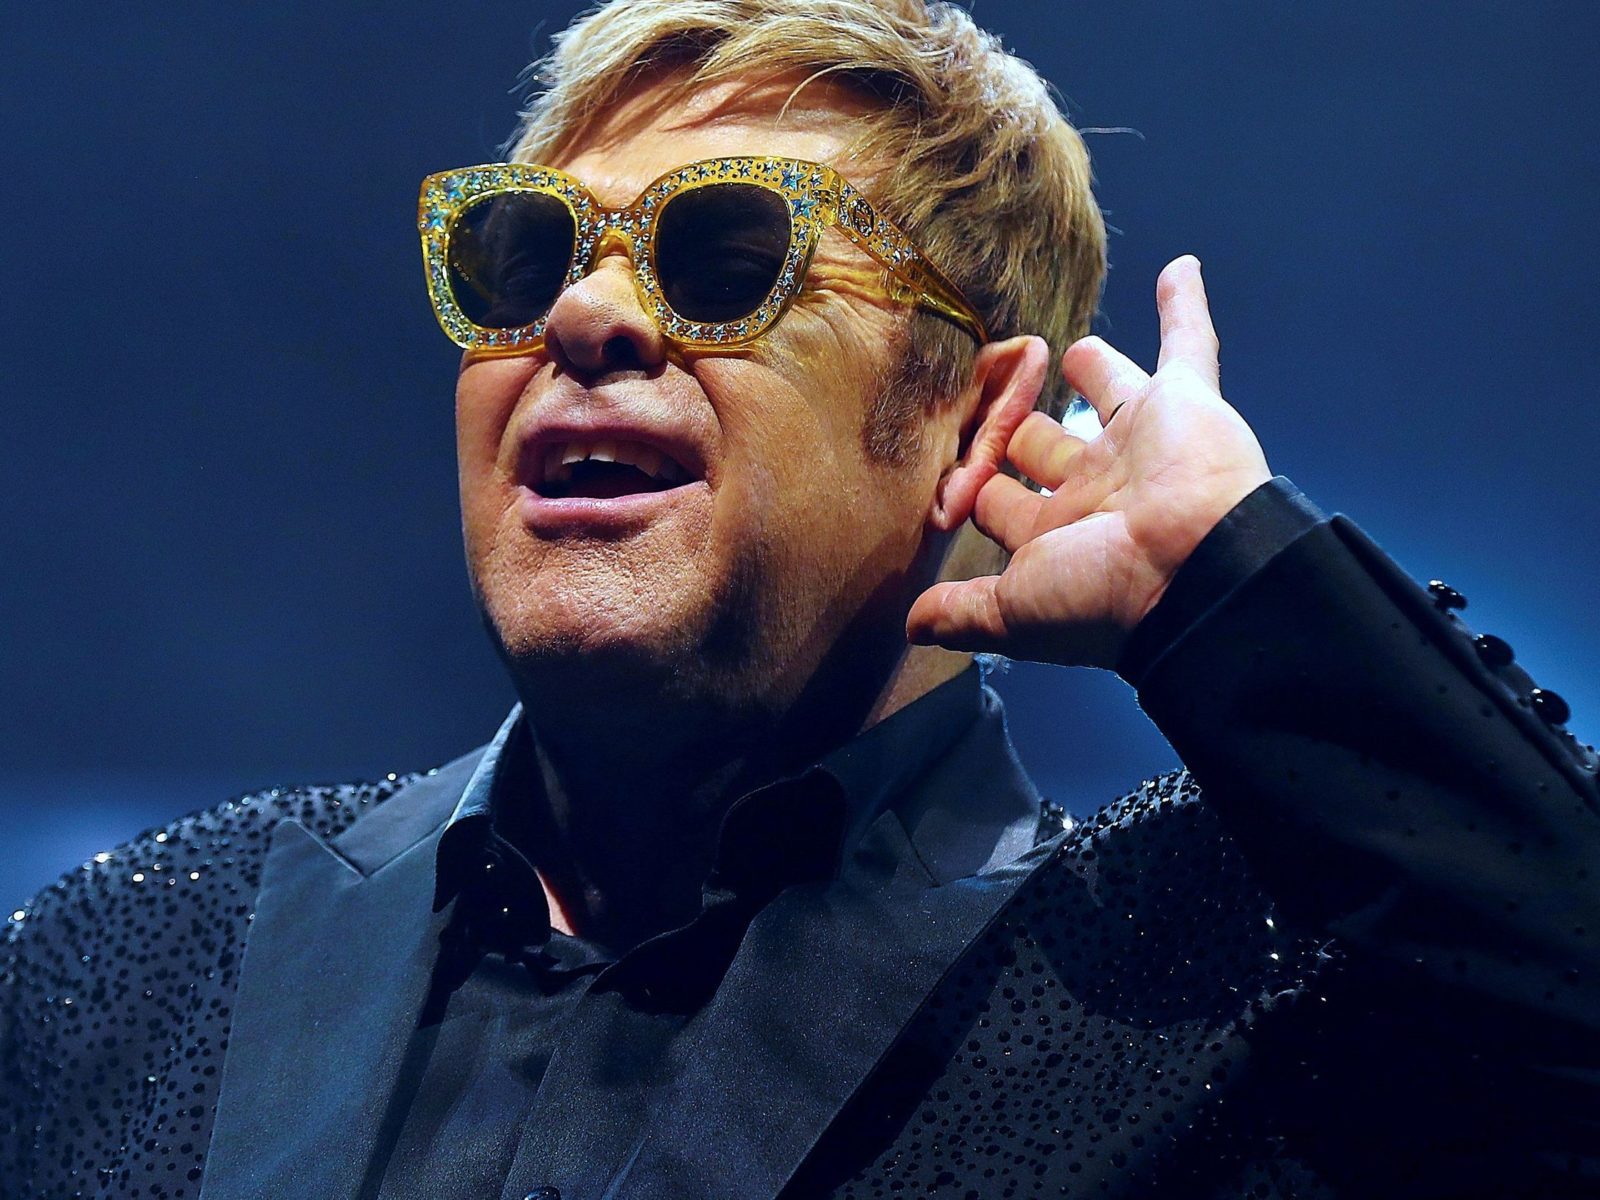 Elton John collaborated with several musicians in his career, including the late George Michael.